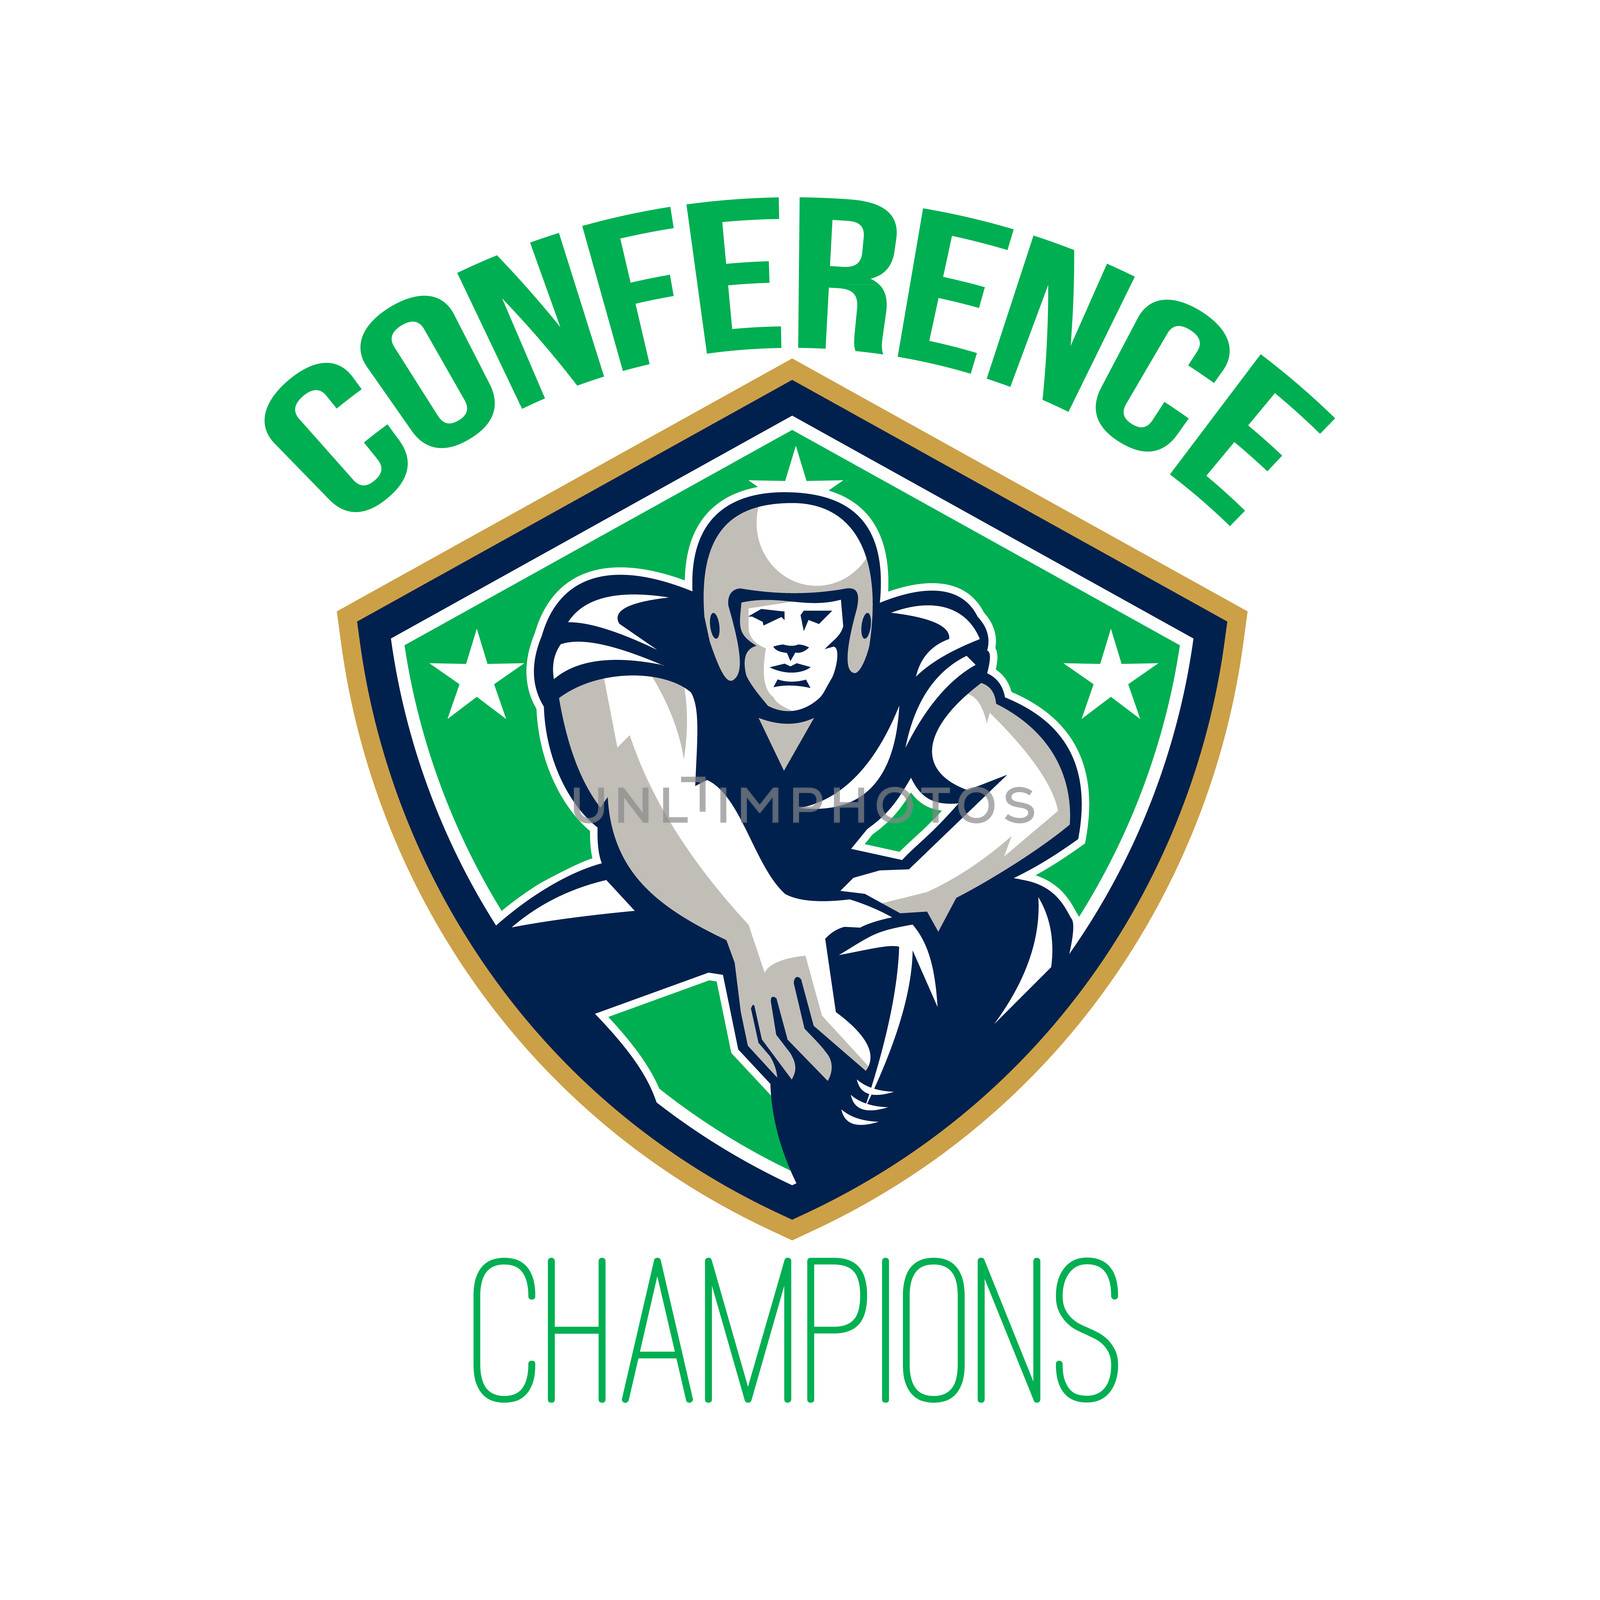 American Football Snap Conference Champions by patrimonio